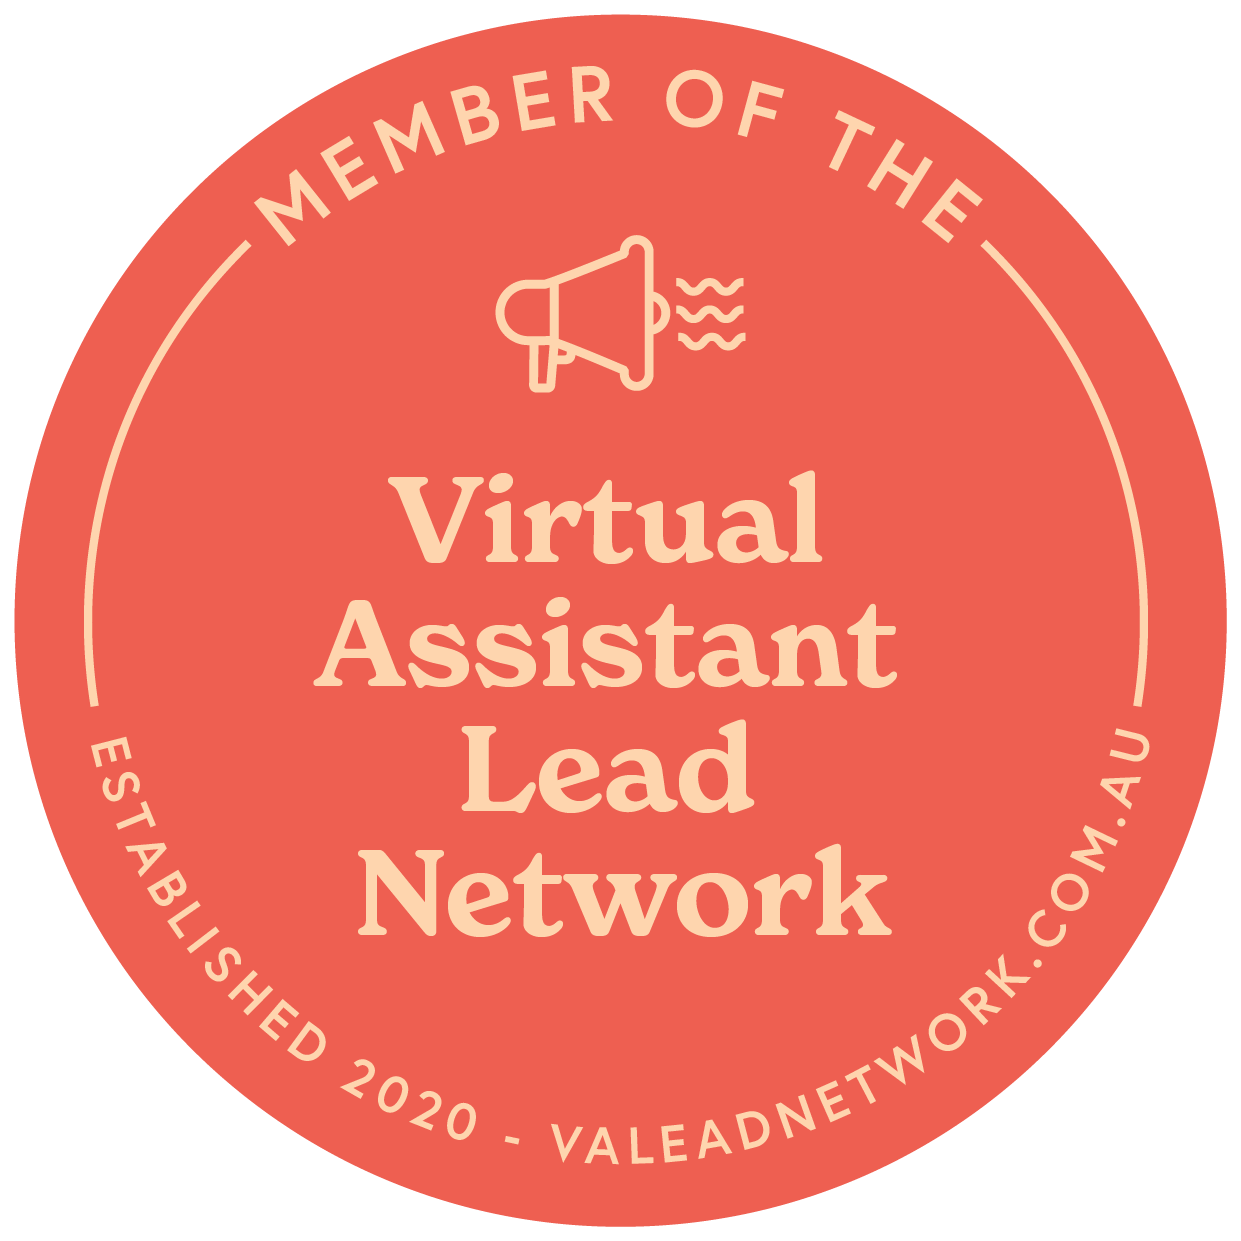 Thought Penny is a member of the Australia Virtual Assistant Lead Network